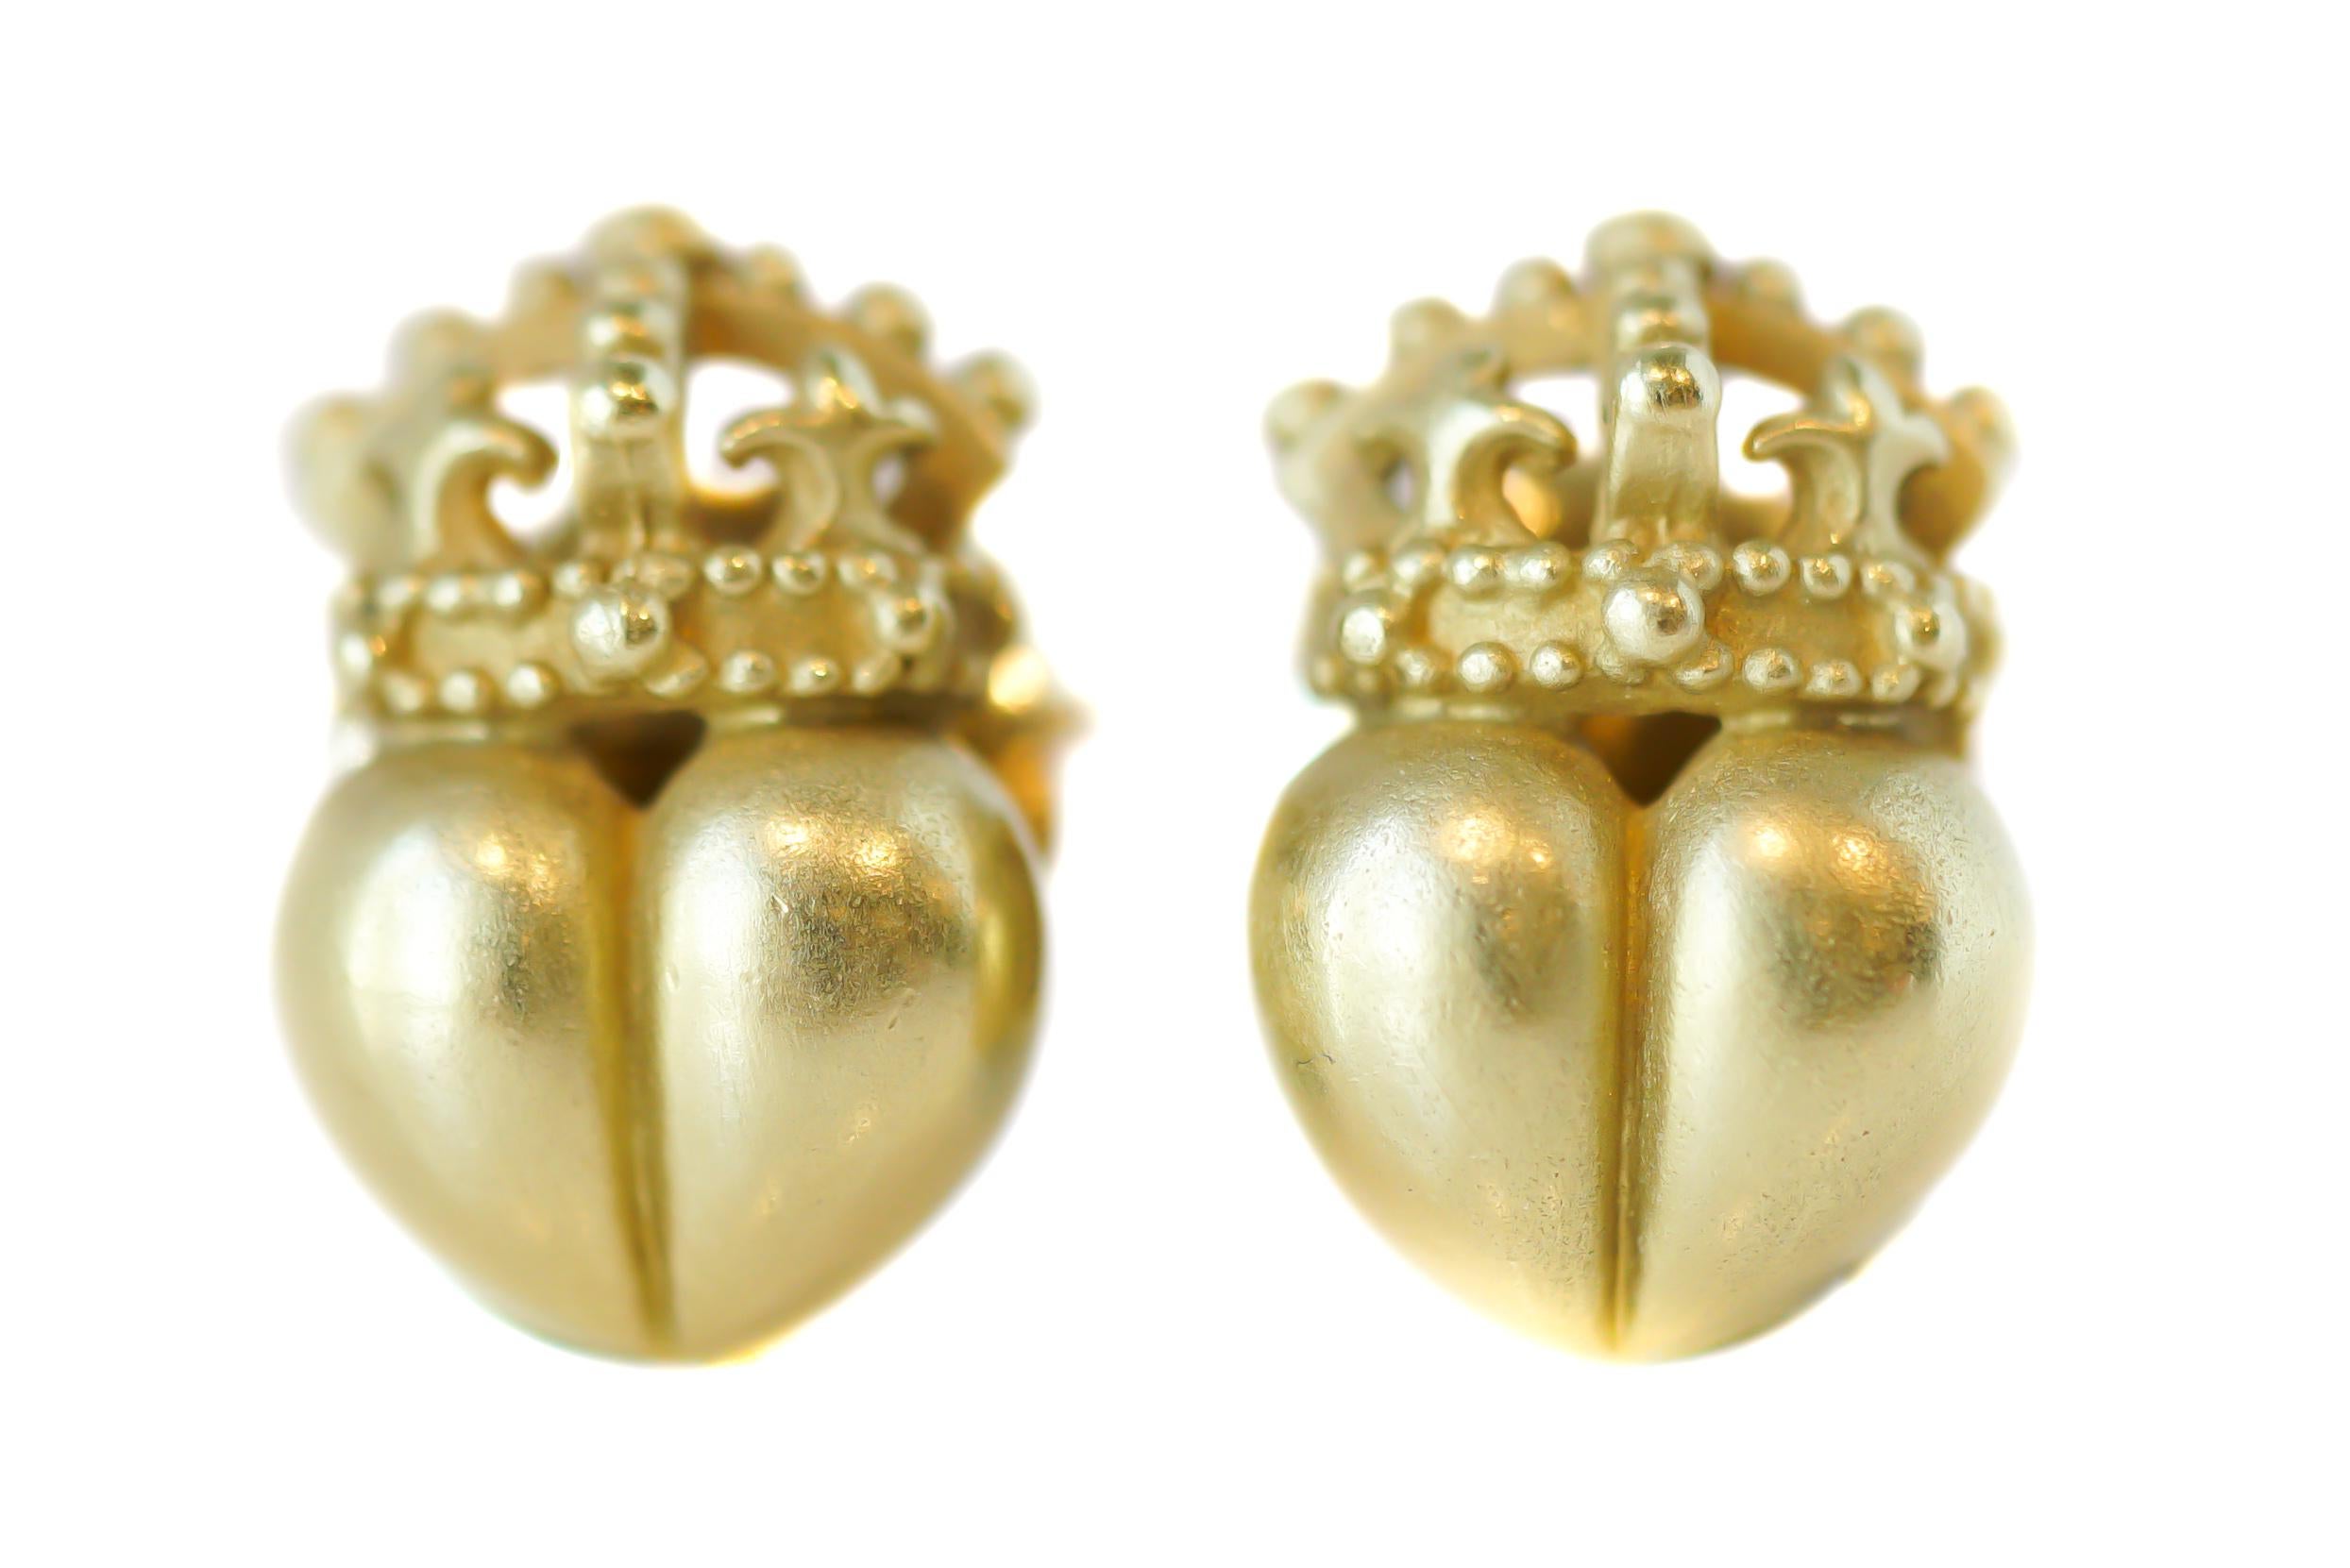 1980s Iconic Kisselstein-Cord Heart Crown Earrings - 18 karat Gold, Green Gold

Features:
Collector's Item, No Longer Produced!
Signature 18 Karat Green Gold 
Matte finish Gold Puffed Hearts
Detailed, Ornate Crown tops 
Large Push Backs for added